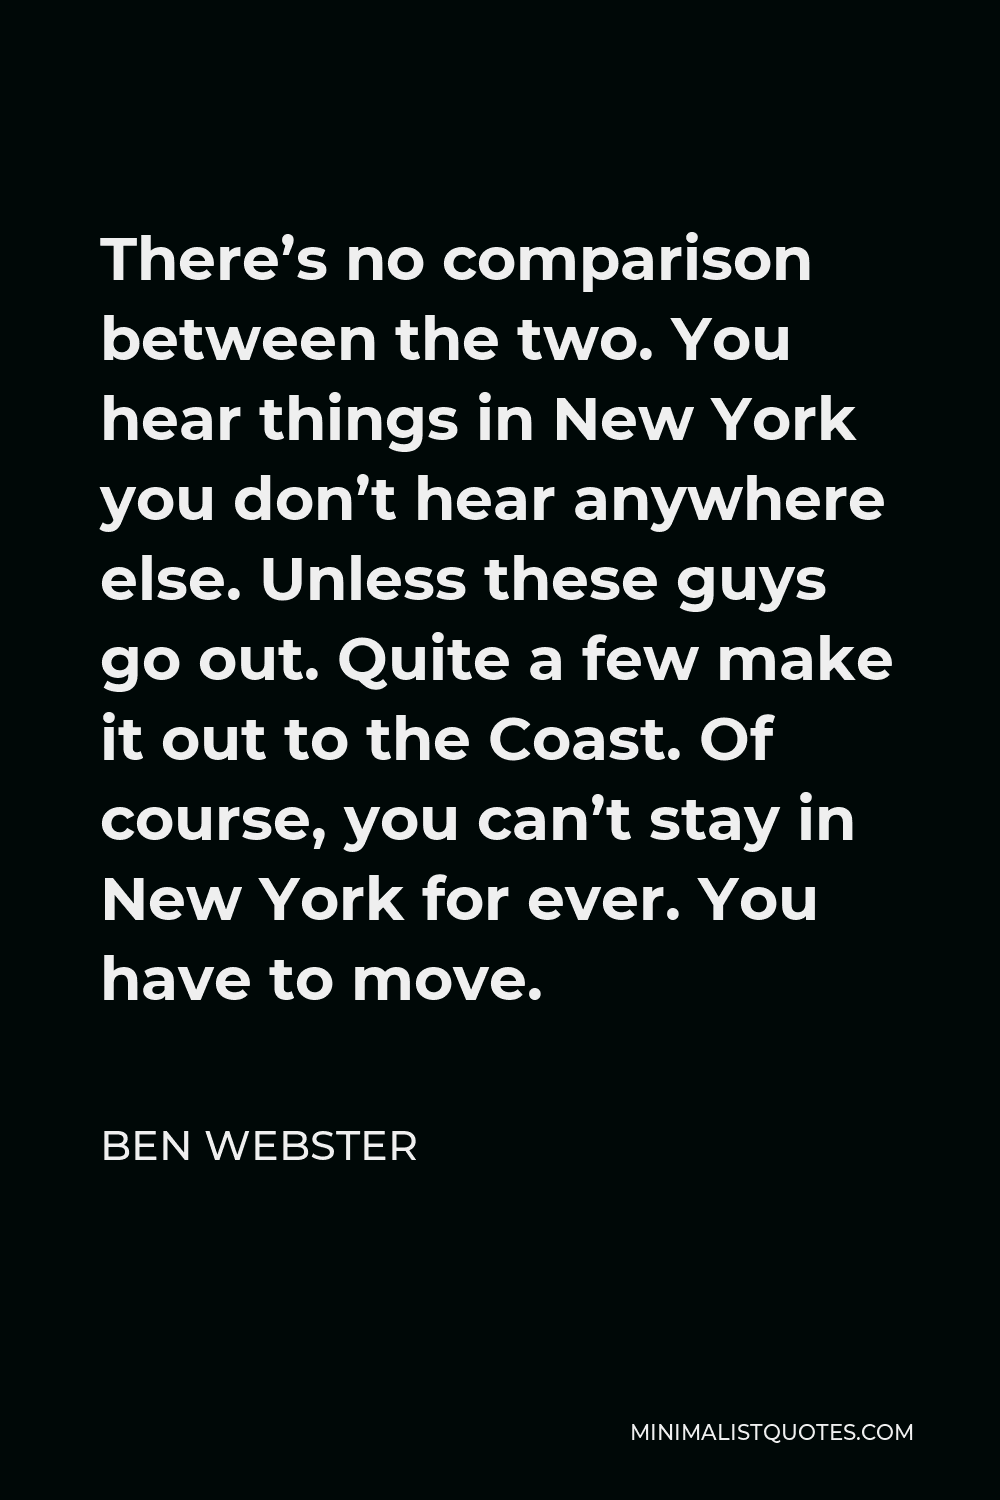 Ben Webster Quote - There’s no comparison between the two. You hear things in New York you don’t hear anywhere else. Unless these guys go out. Quite a few make it out to the Coast. Of course, you can’t stay in New York for ever. You have to move.